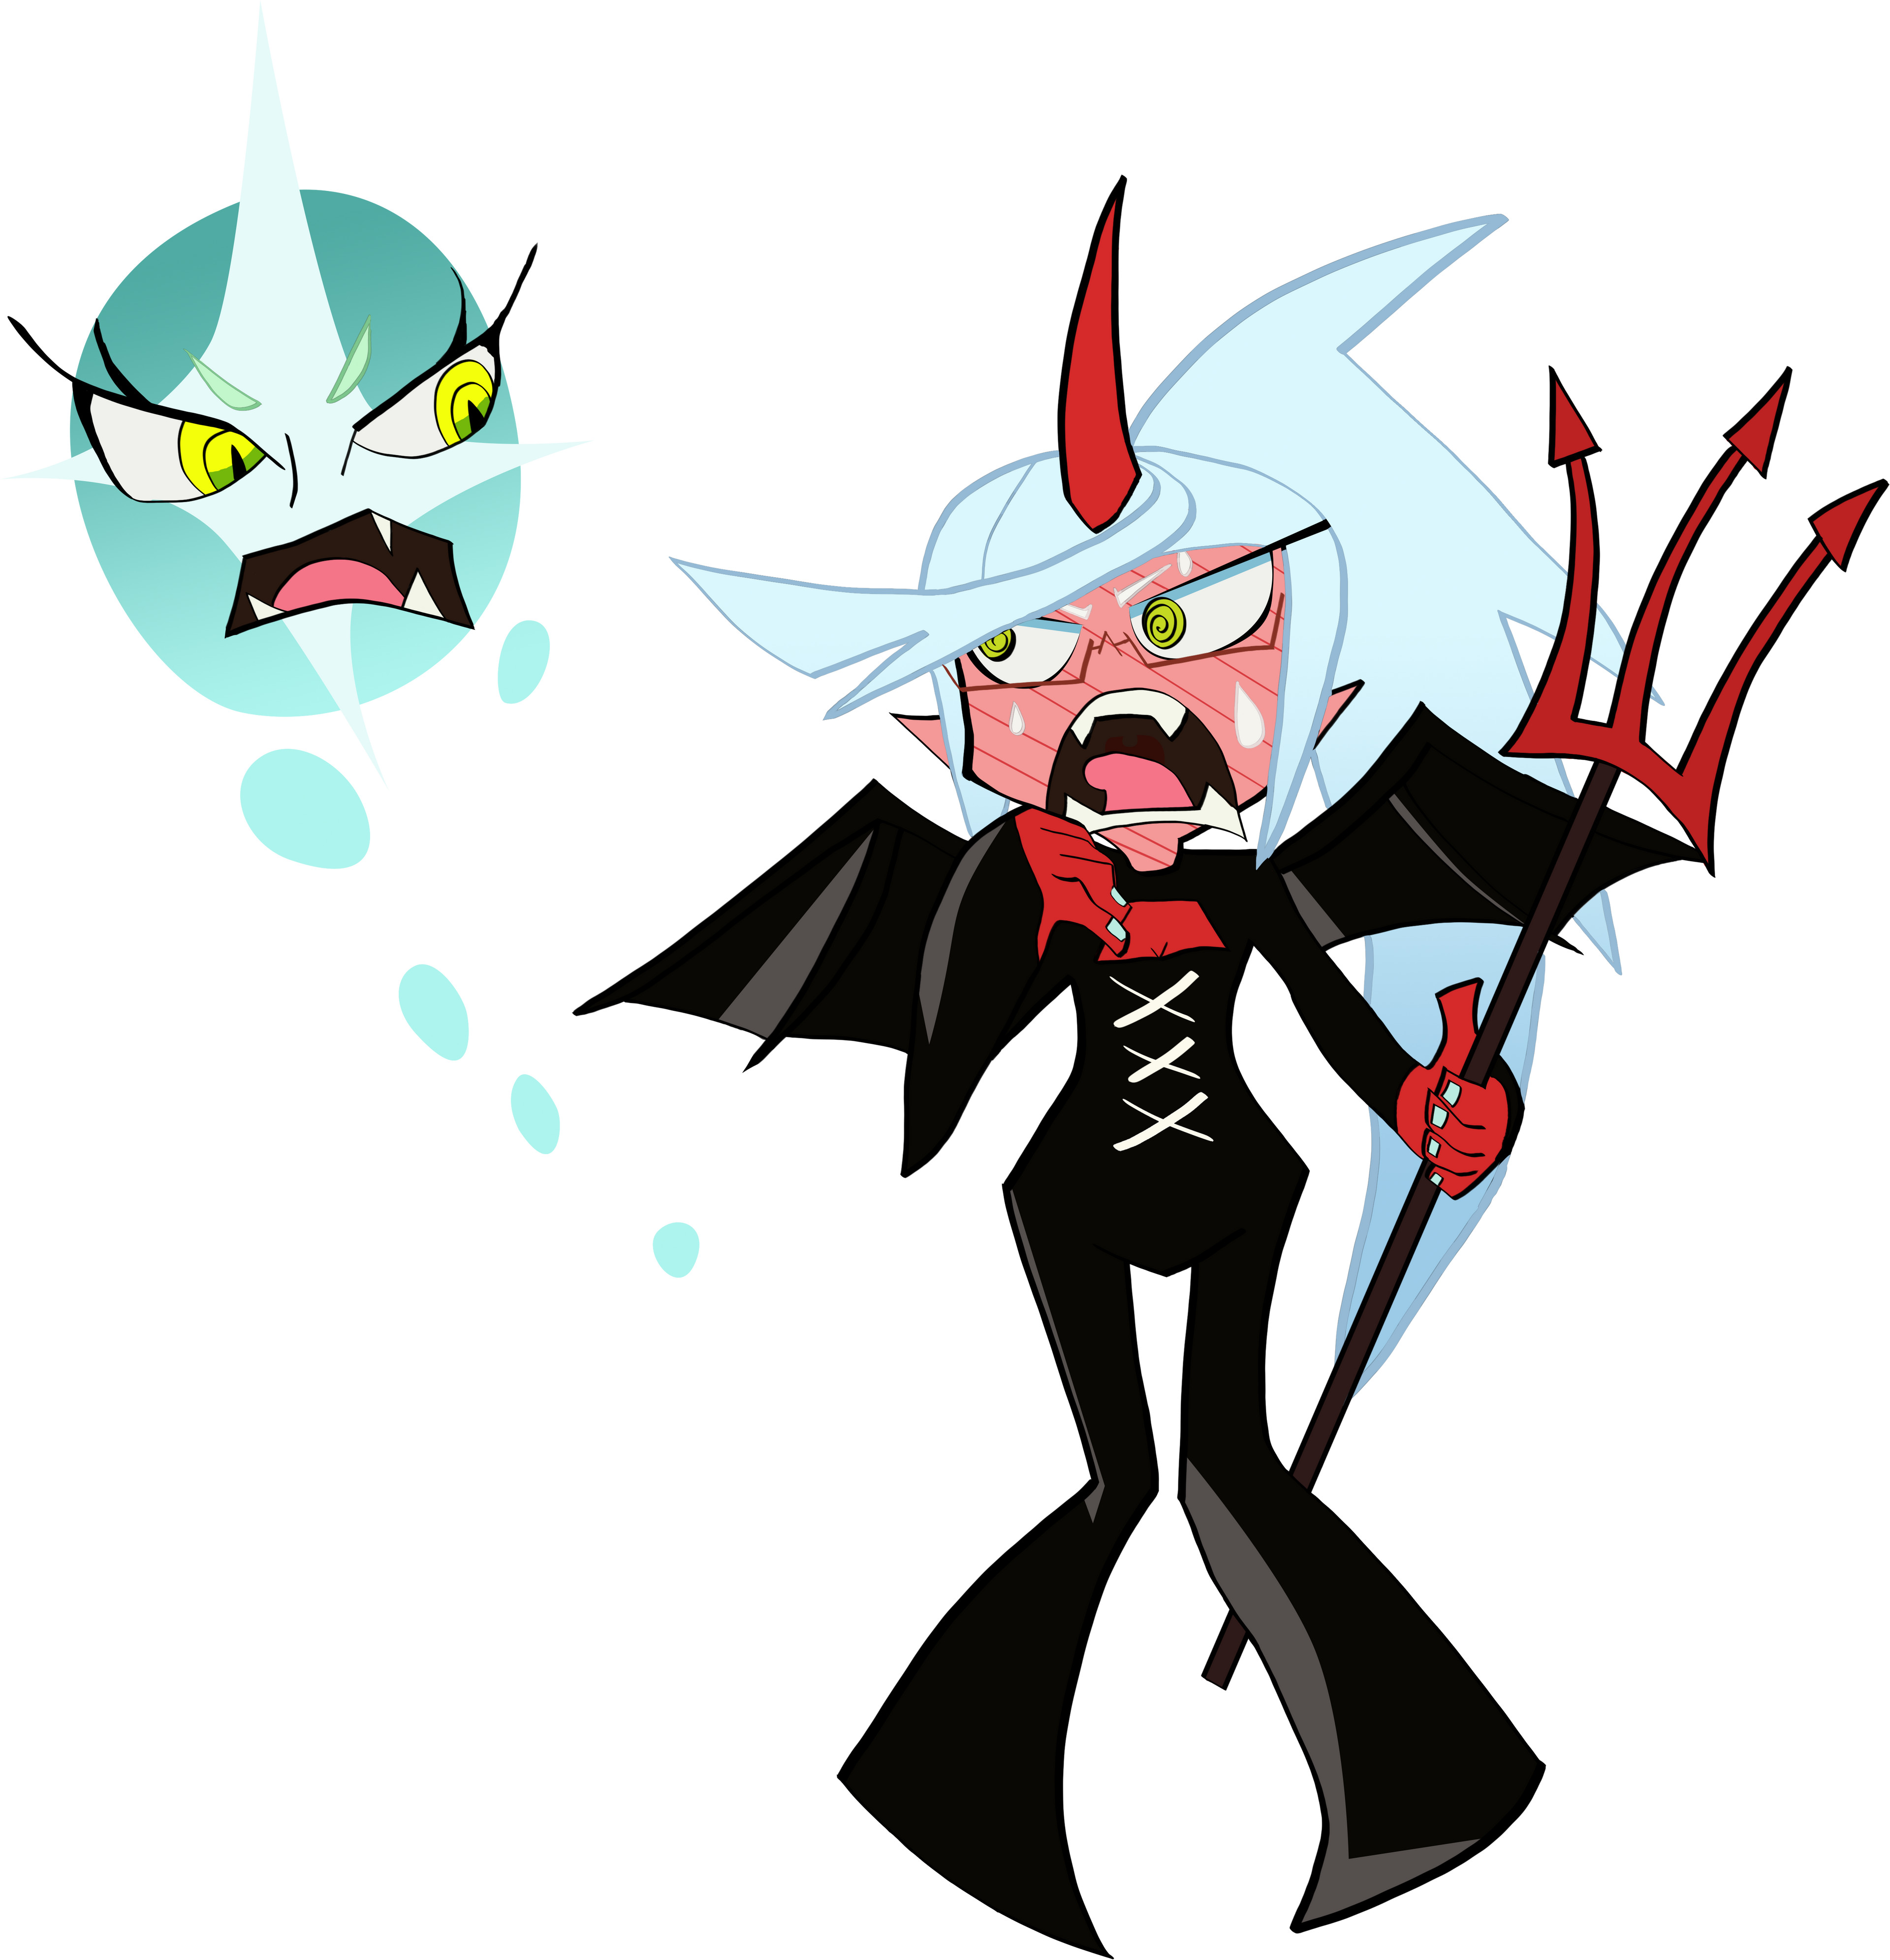 Kneesocks from Panty &amp; Stocking with Garterbelt as the Imp. Scanty's face is being stolen!